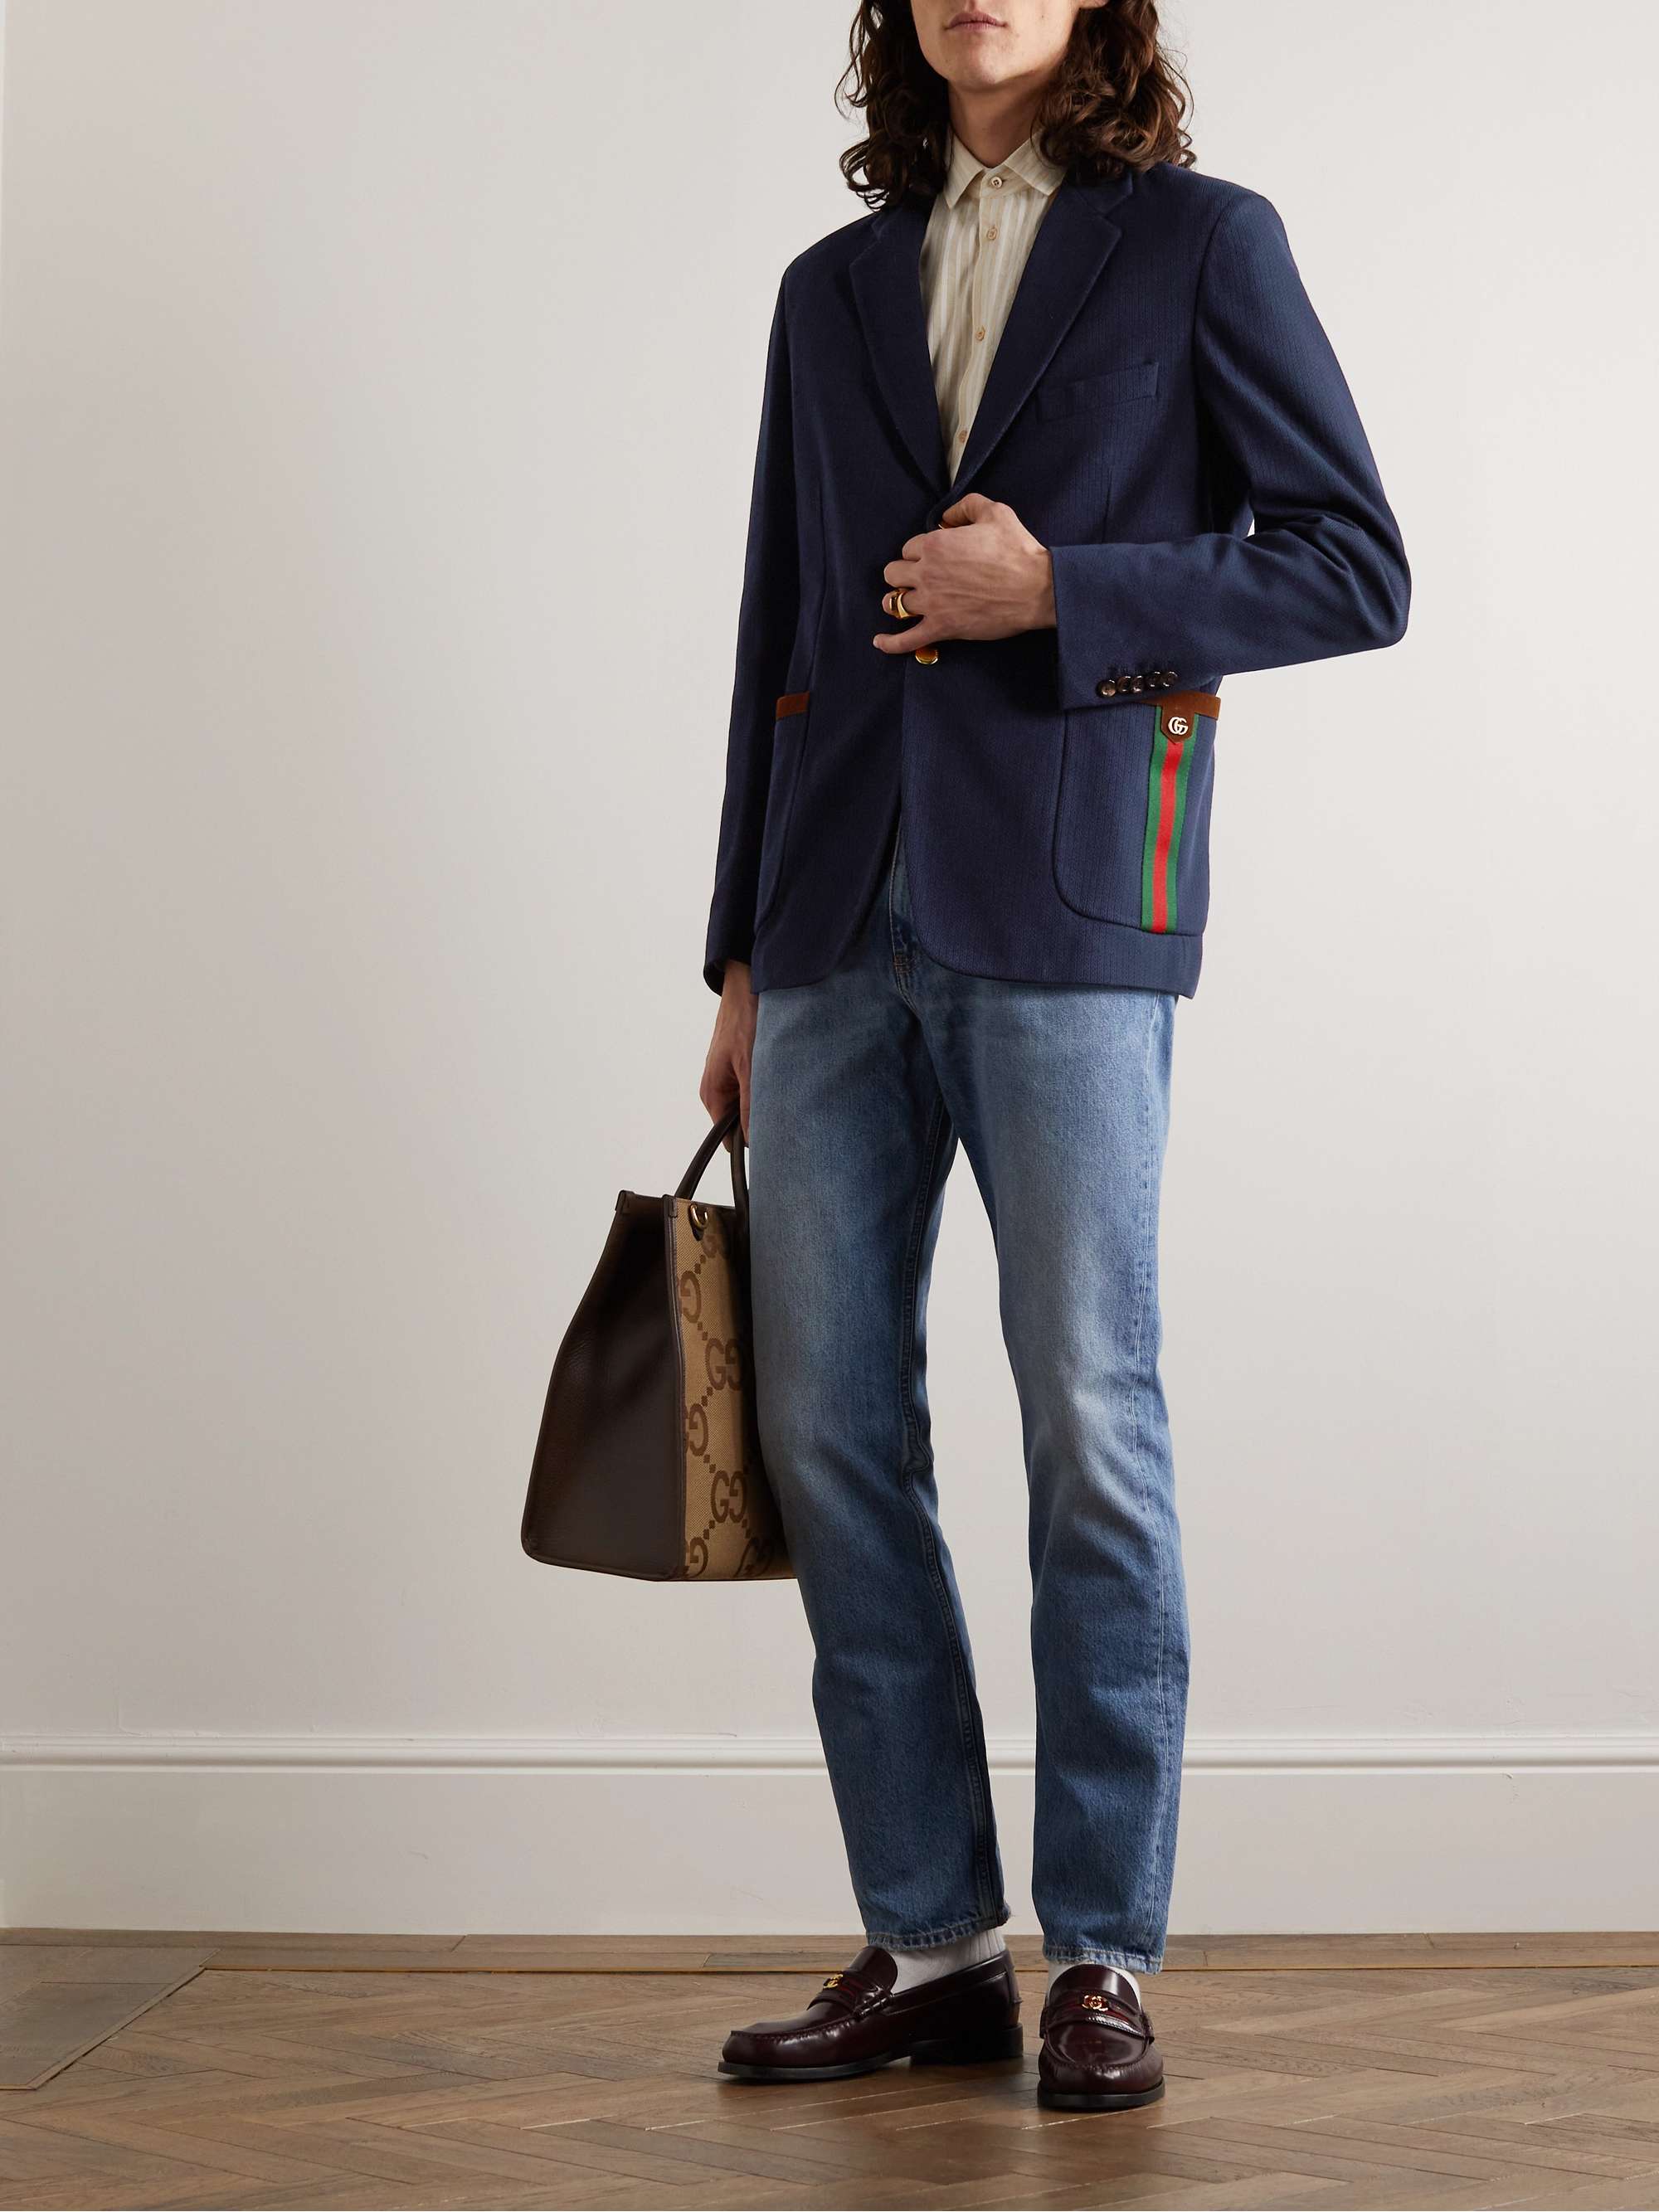 GUCCI Palma Grosgrain- and Suede-Trimmed Cotton Blazer